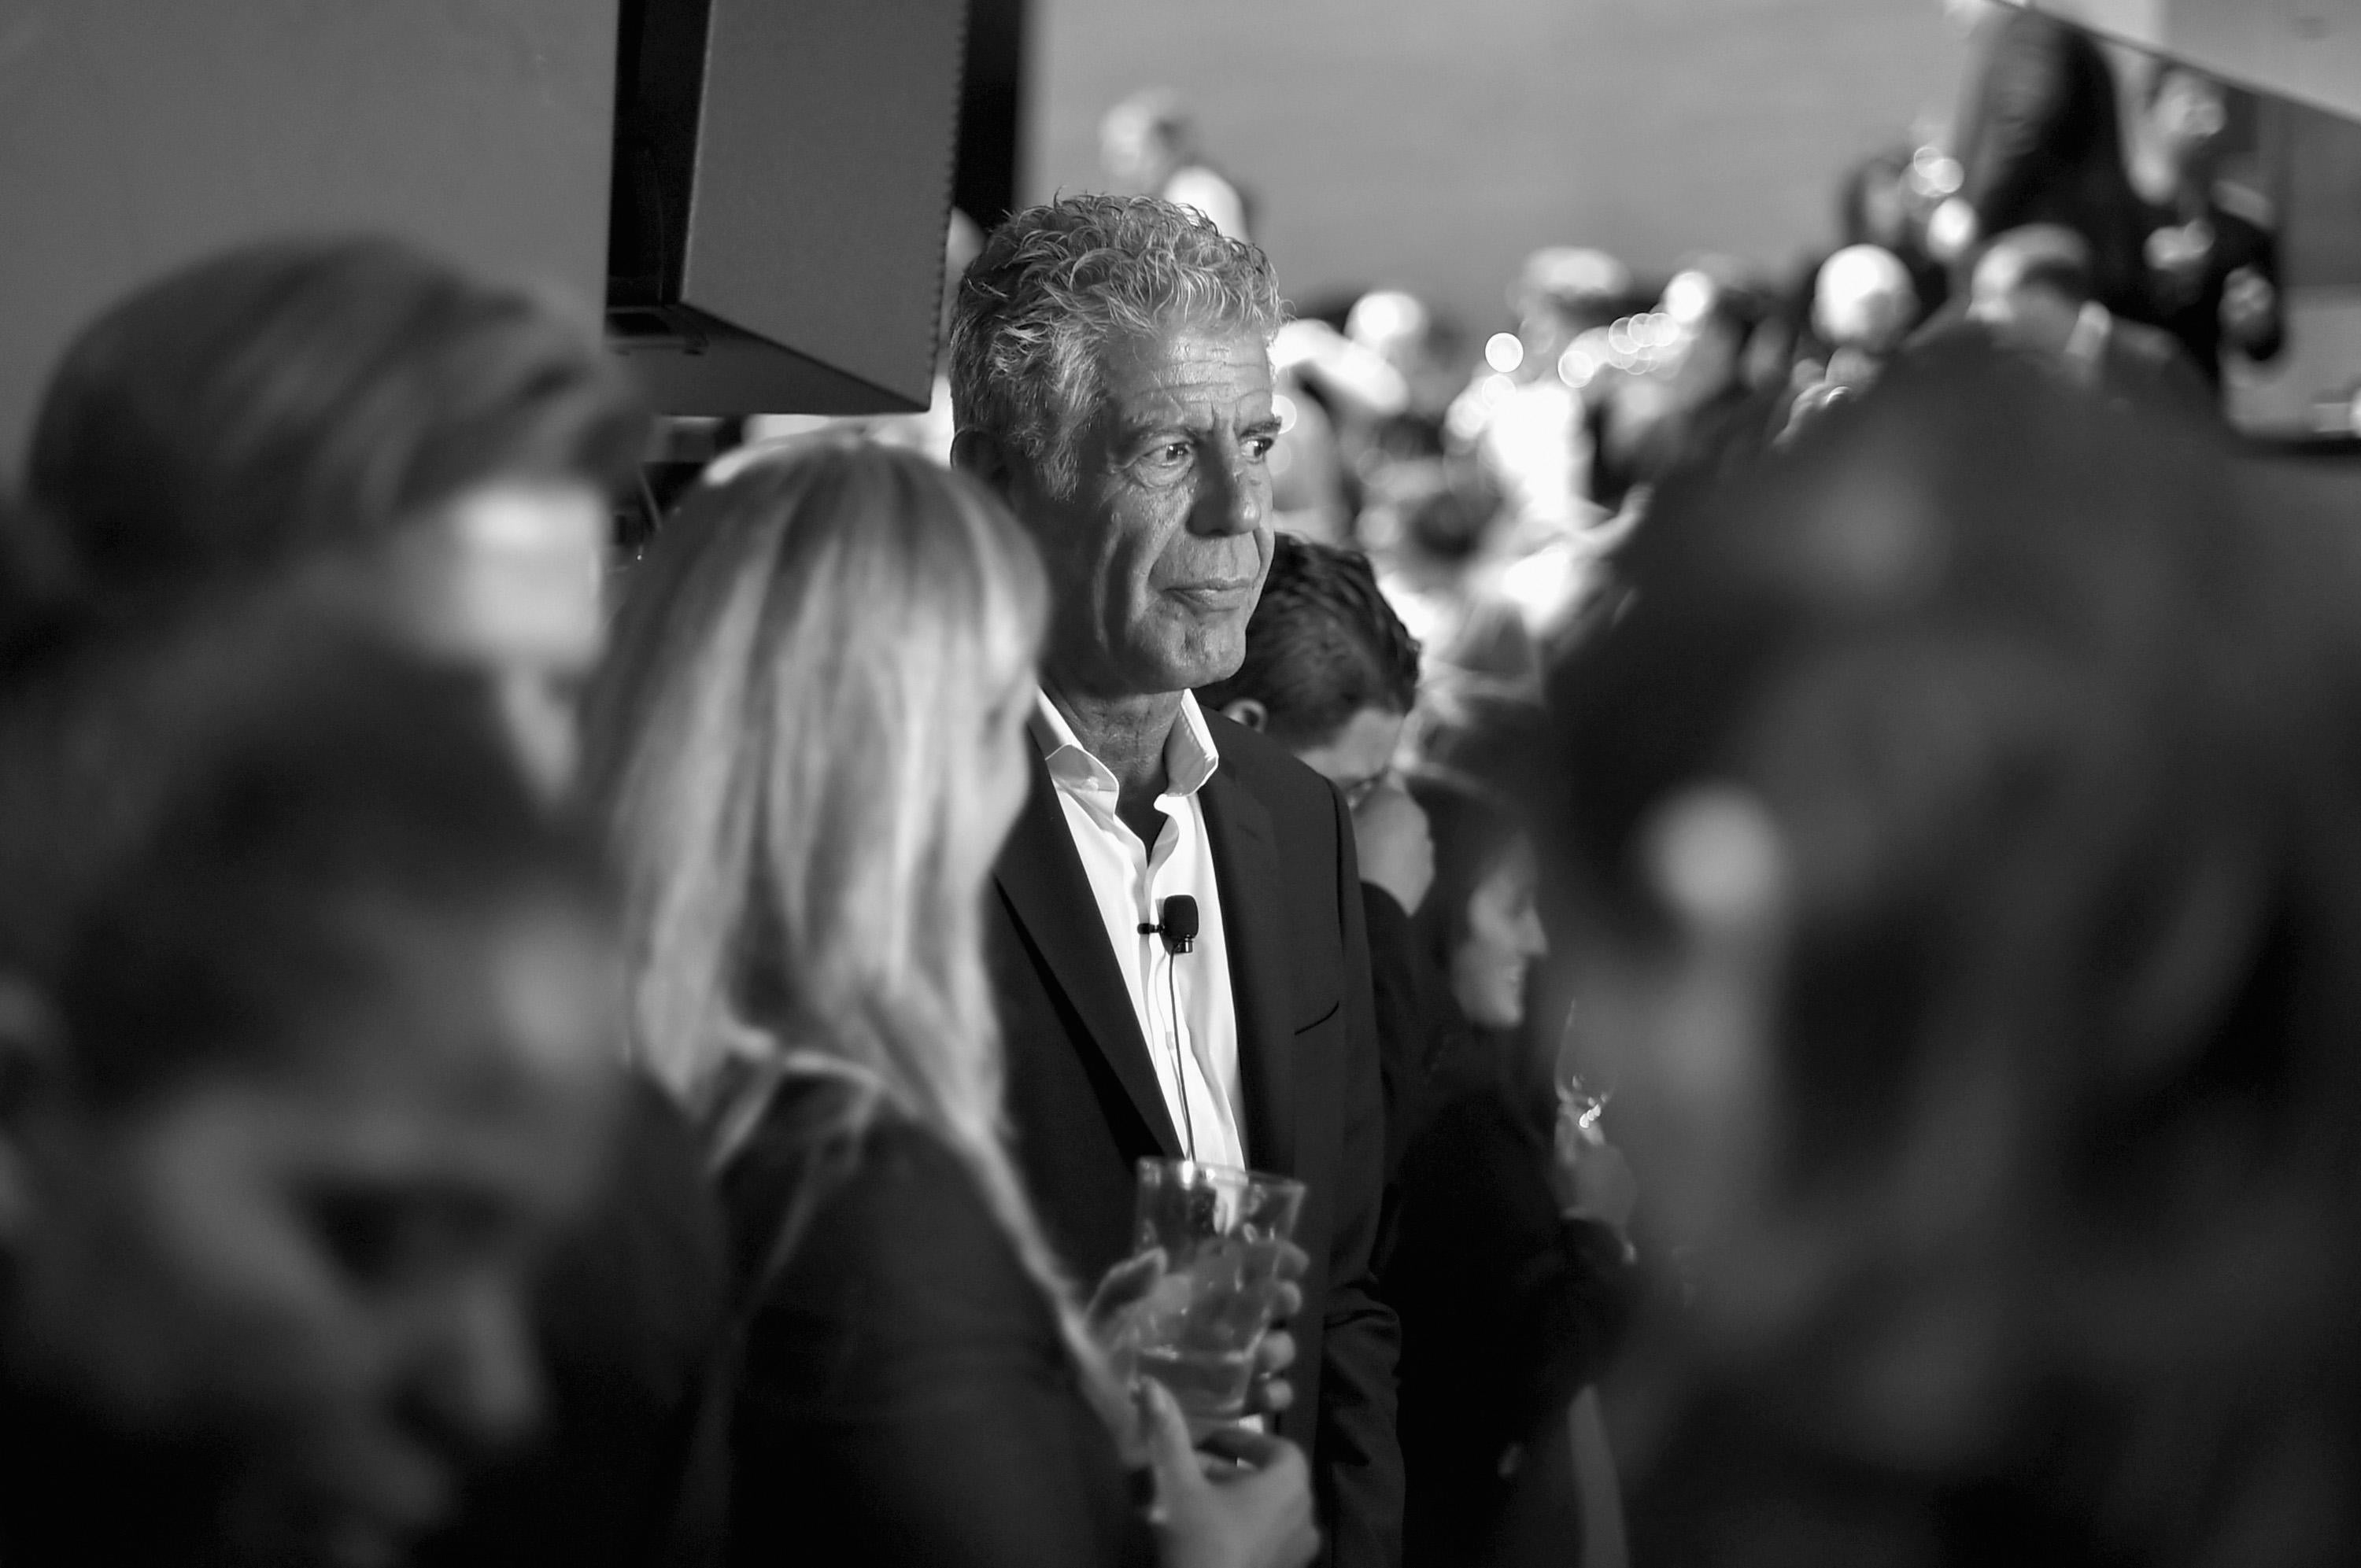 Black and white photo of Anthony Bourdain, standing out among a blur of other people, as he attends a screening of "Anthony Bourdain Parts Unknown: Japan with Masa" on November 7, 2016 in New York City.